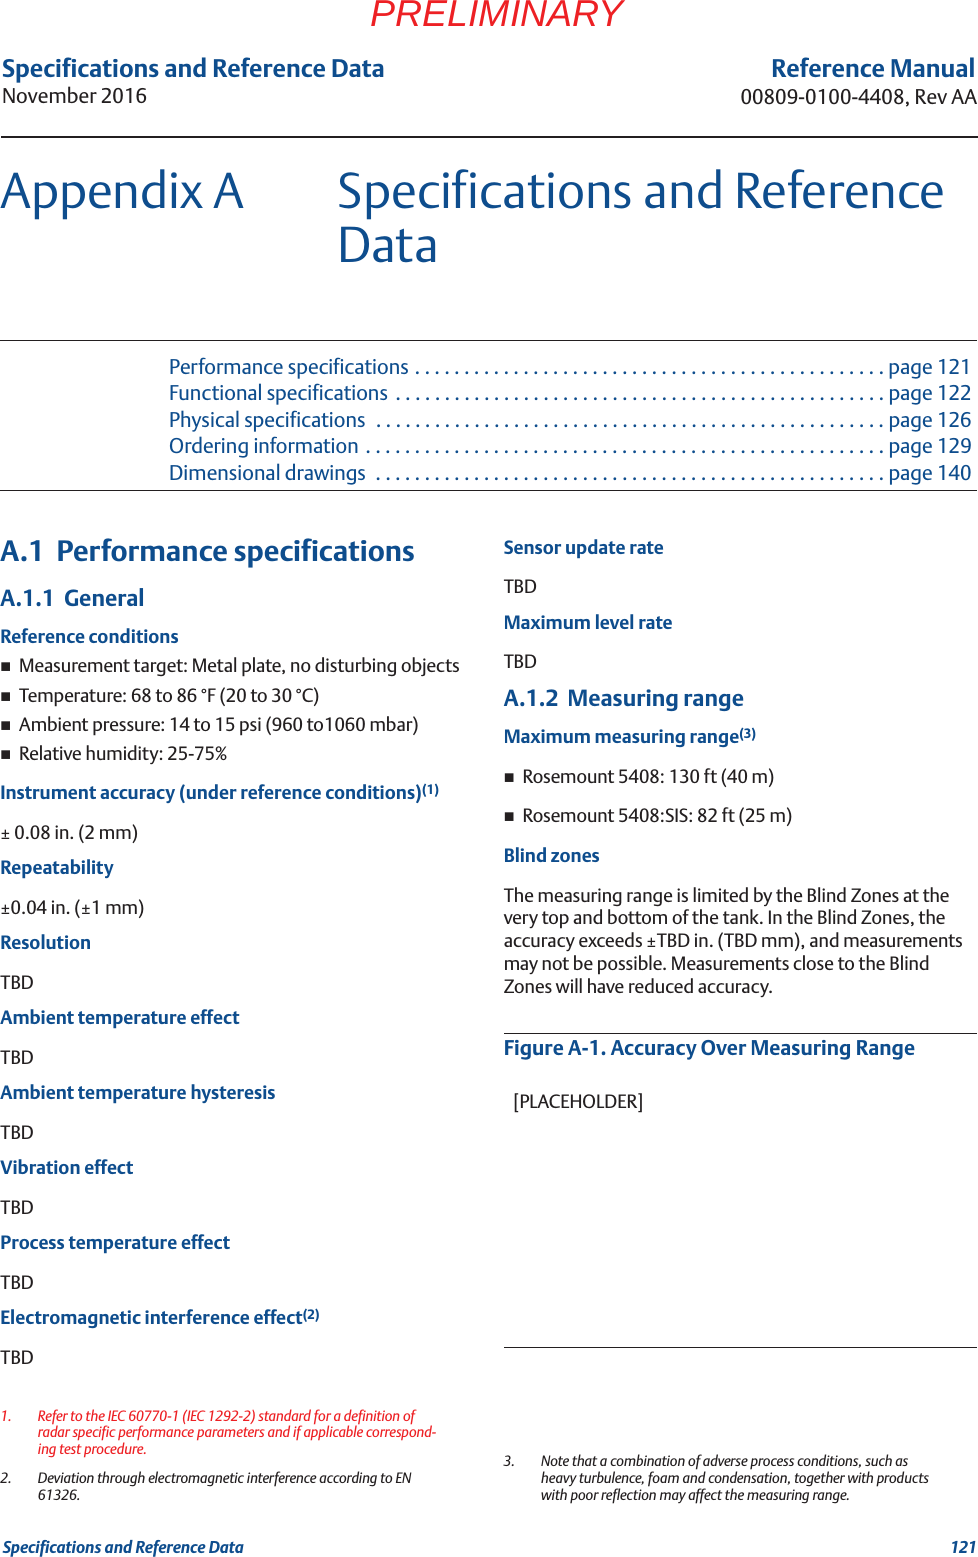 121Specifications and Reference DataSpecifications and Reference DataNovember 2016Reference Manual00809-0100-4408, Rev AAPRELIMINARYAppendix A Specifications and Reference DataPerformance specifications . . . . . . . . . . . . . . . . . . . . . . . . . . . . . . . . . . . . . . . . . . . . . . . . page 121Functional specifications  . . . . . . . . . . . . . . . . . . . . . . . . . . . . . . . . . . . . . . . . . . . . . . . . . . page 122Physical specifications  . . . . . . . . . . . . . . . . . . . . . . . . . . . . . . . . . . . . . . . . . . . . . . . . . . . . page 126Ordering information . . . . . . . . . . . . . . . . . . . . . . . . . . . . . . . . . . . . . . . . . . . . . . . . . . . . . page 129Dimensional drawings  . . . . . . . . . . . . . . . . . . . . . . . . . . . . . . . . . . . . . . . . . . . . . . . . . . . . page 140A.1  Performance specificationsA.1.1  GeneralReference conditionsMeasurement target: Metal plate, no disturbing objectsTemperature: 68 to 86 °F (20 to 30 °C)Ambient pressure: 14 to 15 psi (960 to1060 mbar)Relative humidity: 25-75%Instrument accuracy (under reference conditions)(1)± 0.08 in. (2 mm)Repeatability±0.04 in. (±1 mm)ResolutionTBDAmbient temperature effectTBDAmbient temperature hysteresisTBDVibration effectTBDProcess temperature effectTBDElectromagnetic interference effect(2)TBDSensor update rateTBDMaximum level rateTBDA.1.2  Measuring rangeMaximum measuring range(3)Rosemount 5408: 130 ft (40 m)Rosemount 5408:SIS: 82 ft (25 m)Blind zonesThe measuring range is limited by the Blind Zones at the very top and bottom of the tank. In the Blind Zones, the accuracy exceeds ±TBD in. (TBD mm), and measurements may not be possible. Measurements close to the Blind Zones will have reduced accuracy.Figure A-1. Accuracy Over Measuring Range1. Refer to the IEC 60770-1 (IEC 1292-2) standard for a definition of radar specific performance parameters and if applicable correspond-ing test procedure.2. Deviation through electromagnetic interference according to EN 61326.3. Note that a combination of adverse process conditions, such as heavy turbulence, foam and condensation, together with products with poor reflection may affect the measuring range.[PLACEHOLDER]